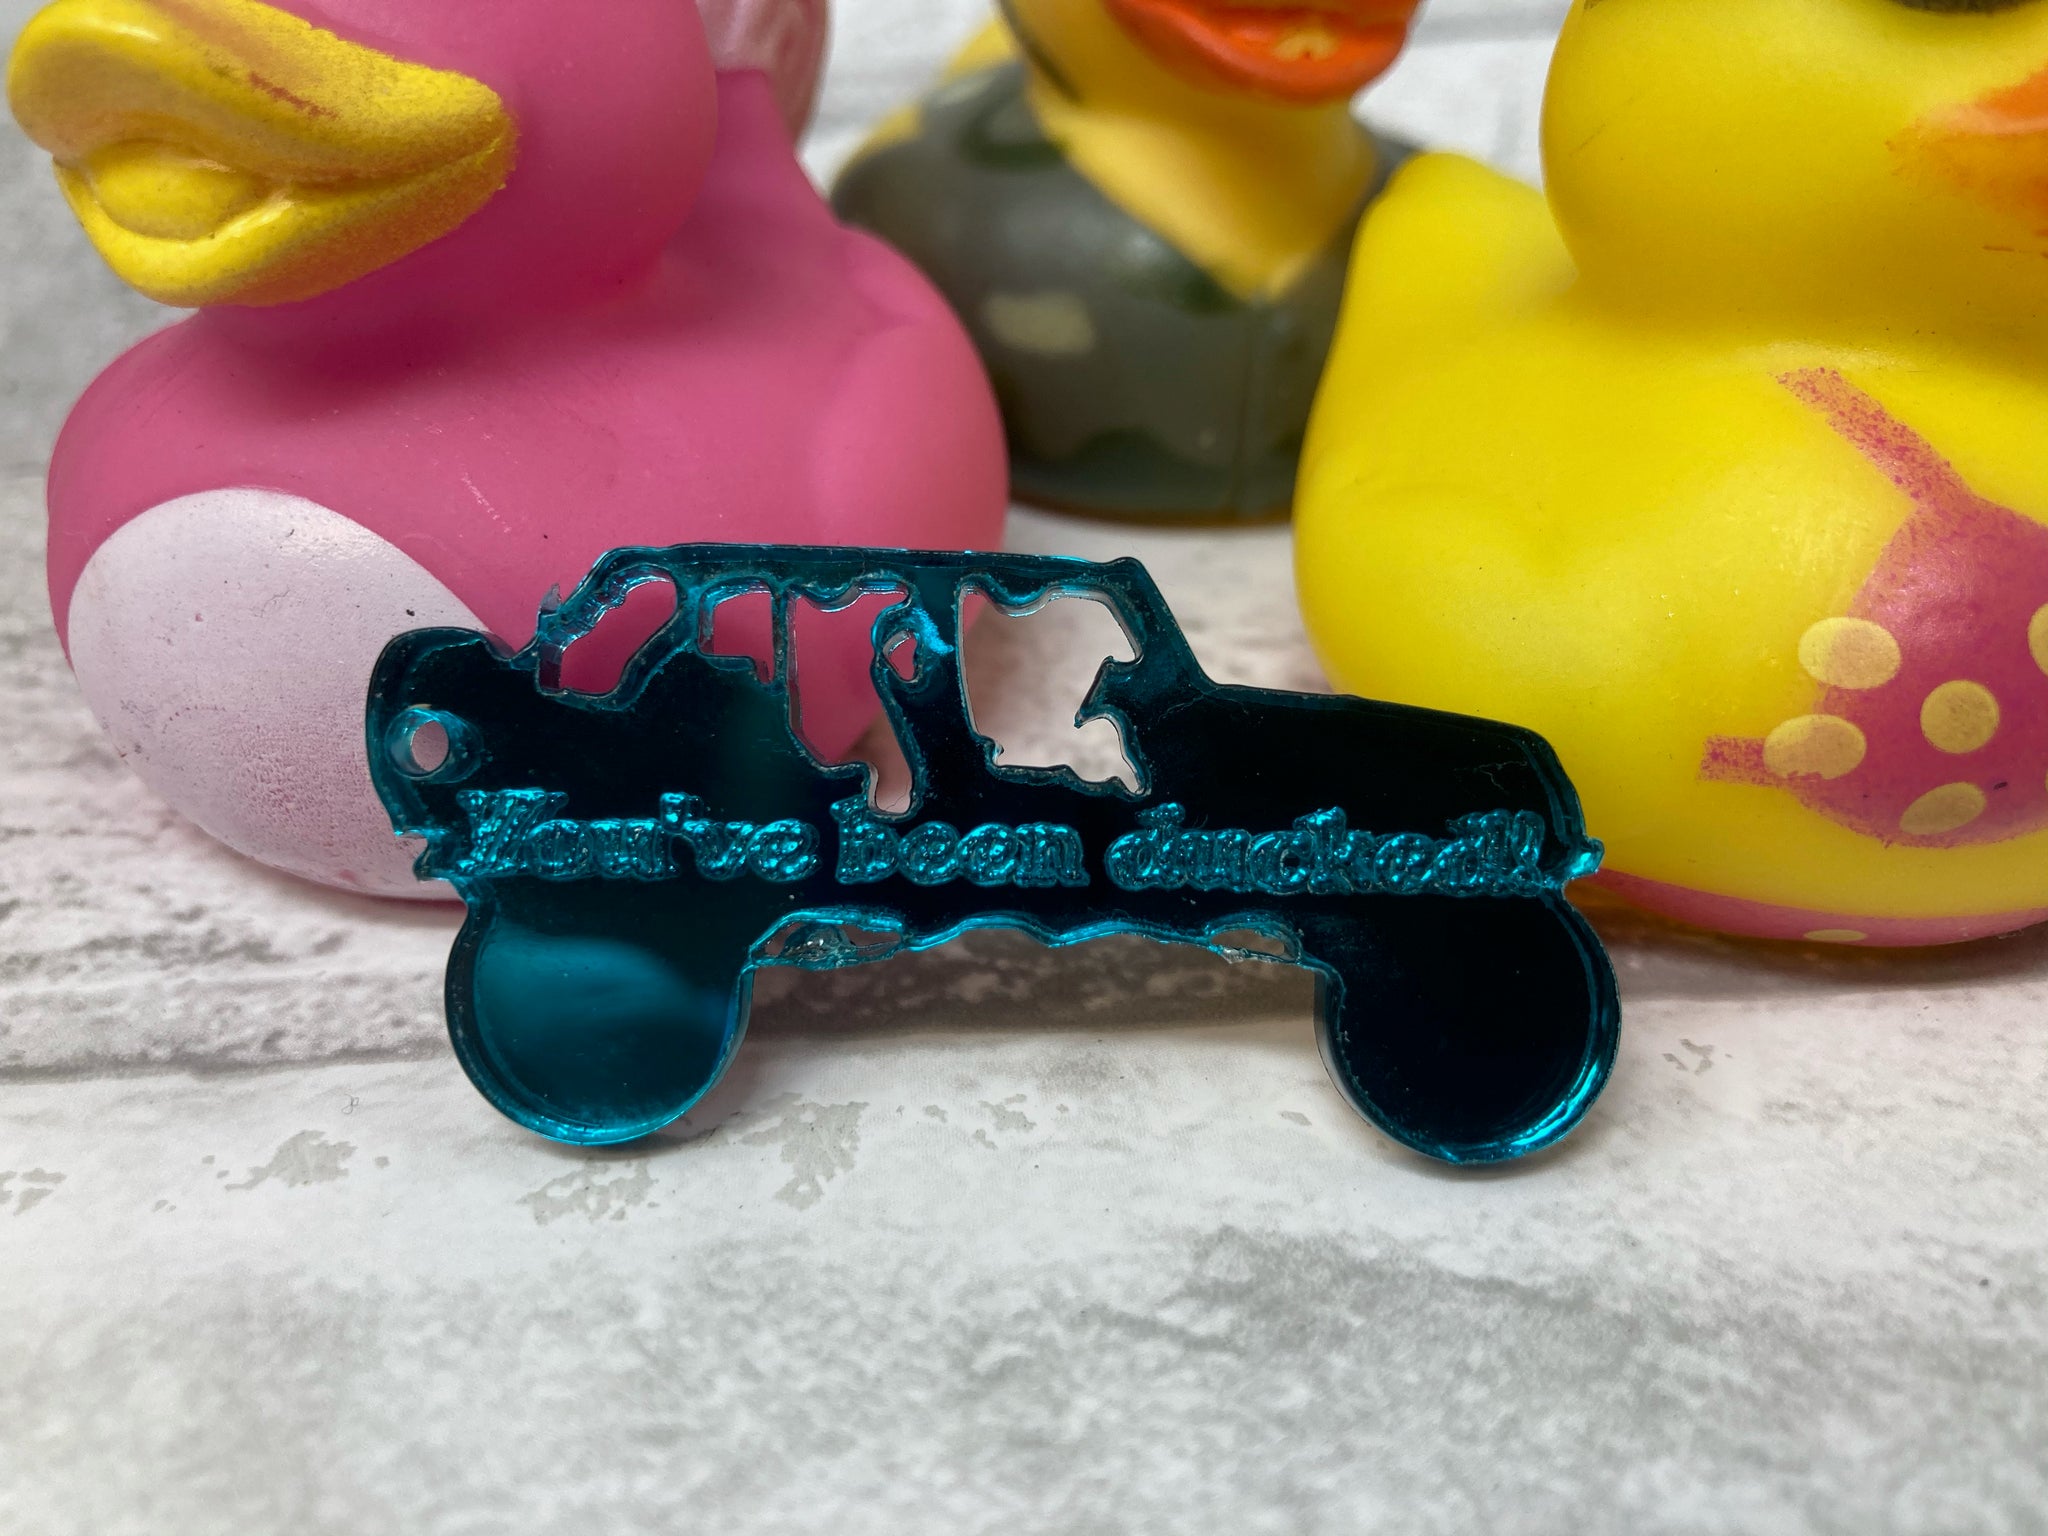 You've been ducked! Jeep Wrangler duck duck Jeep mirrored acrylic teal